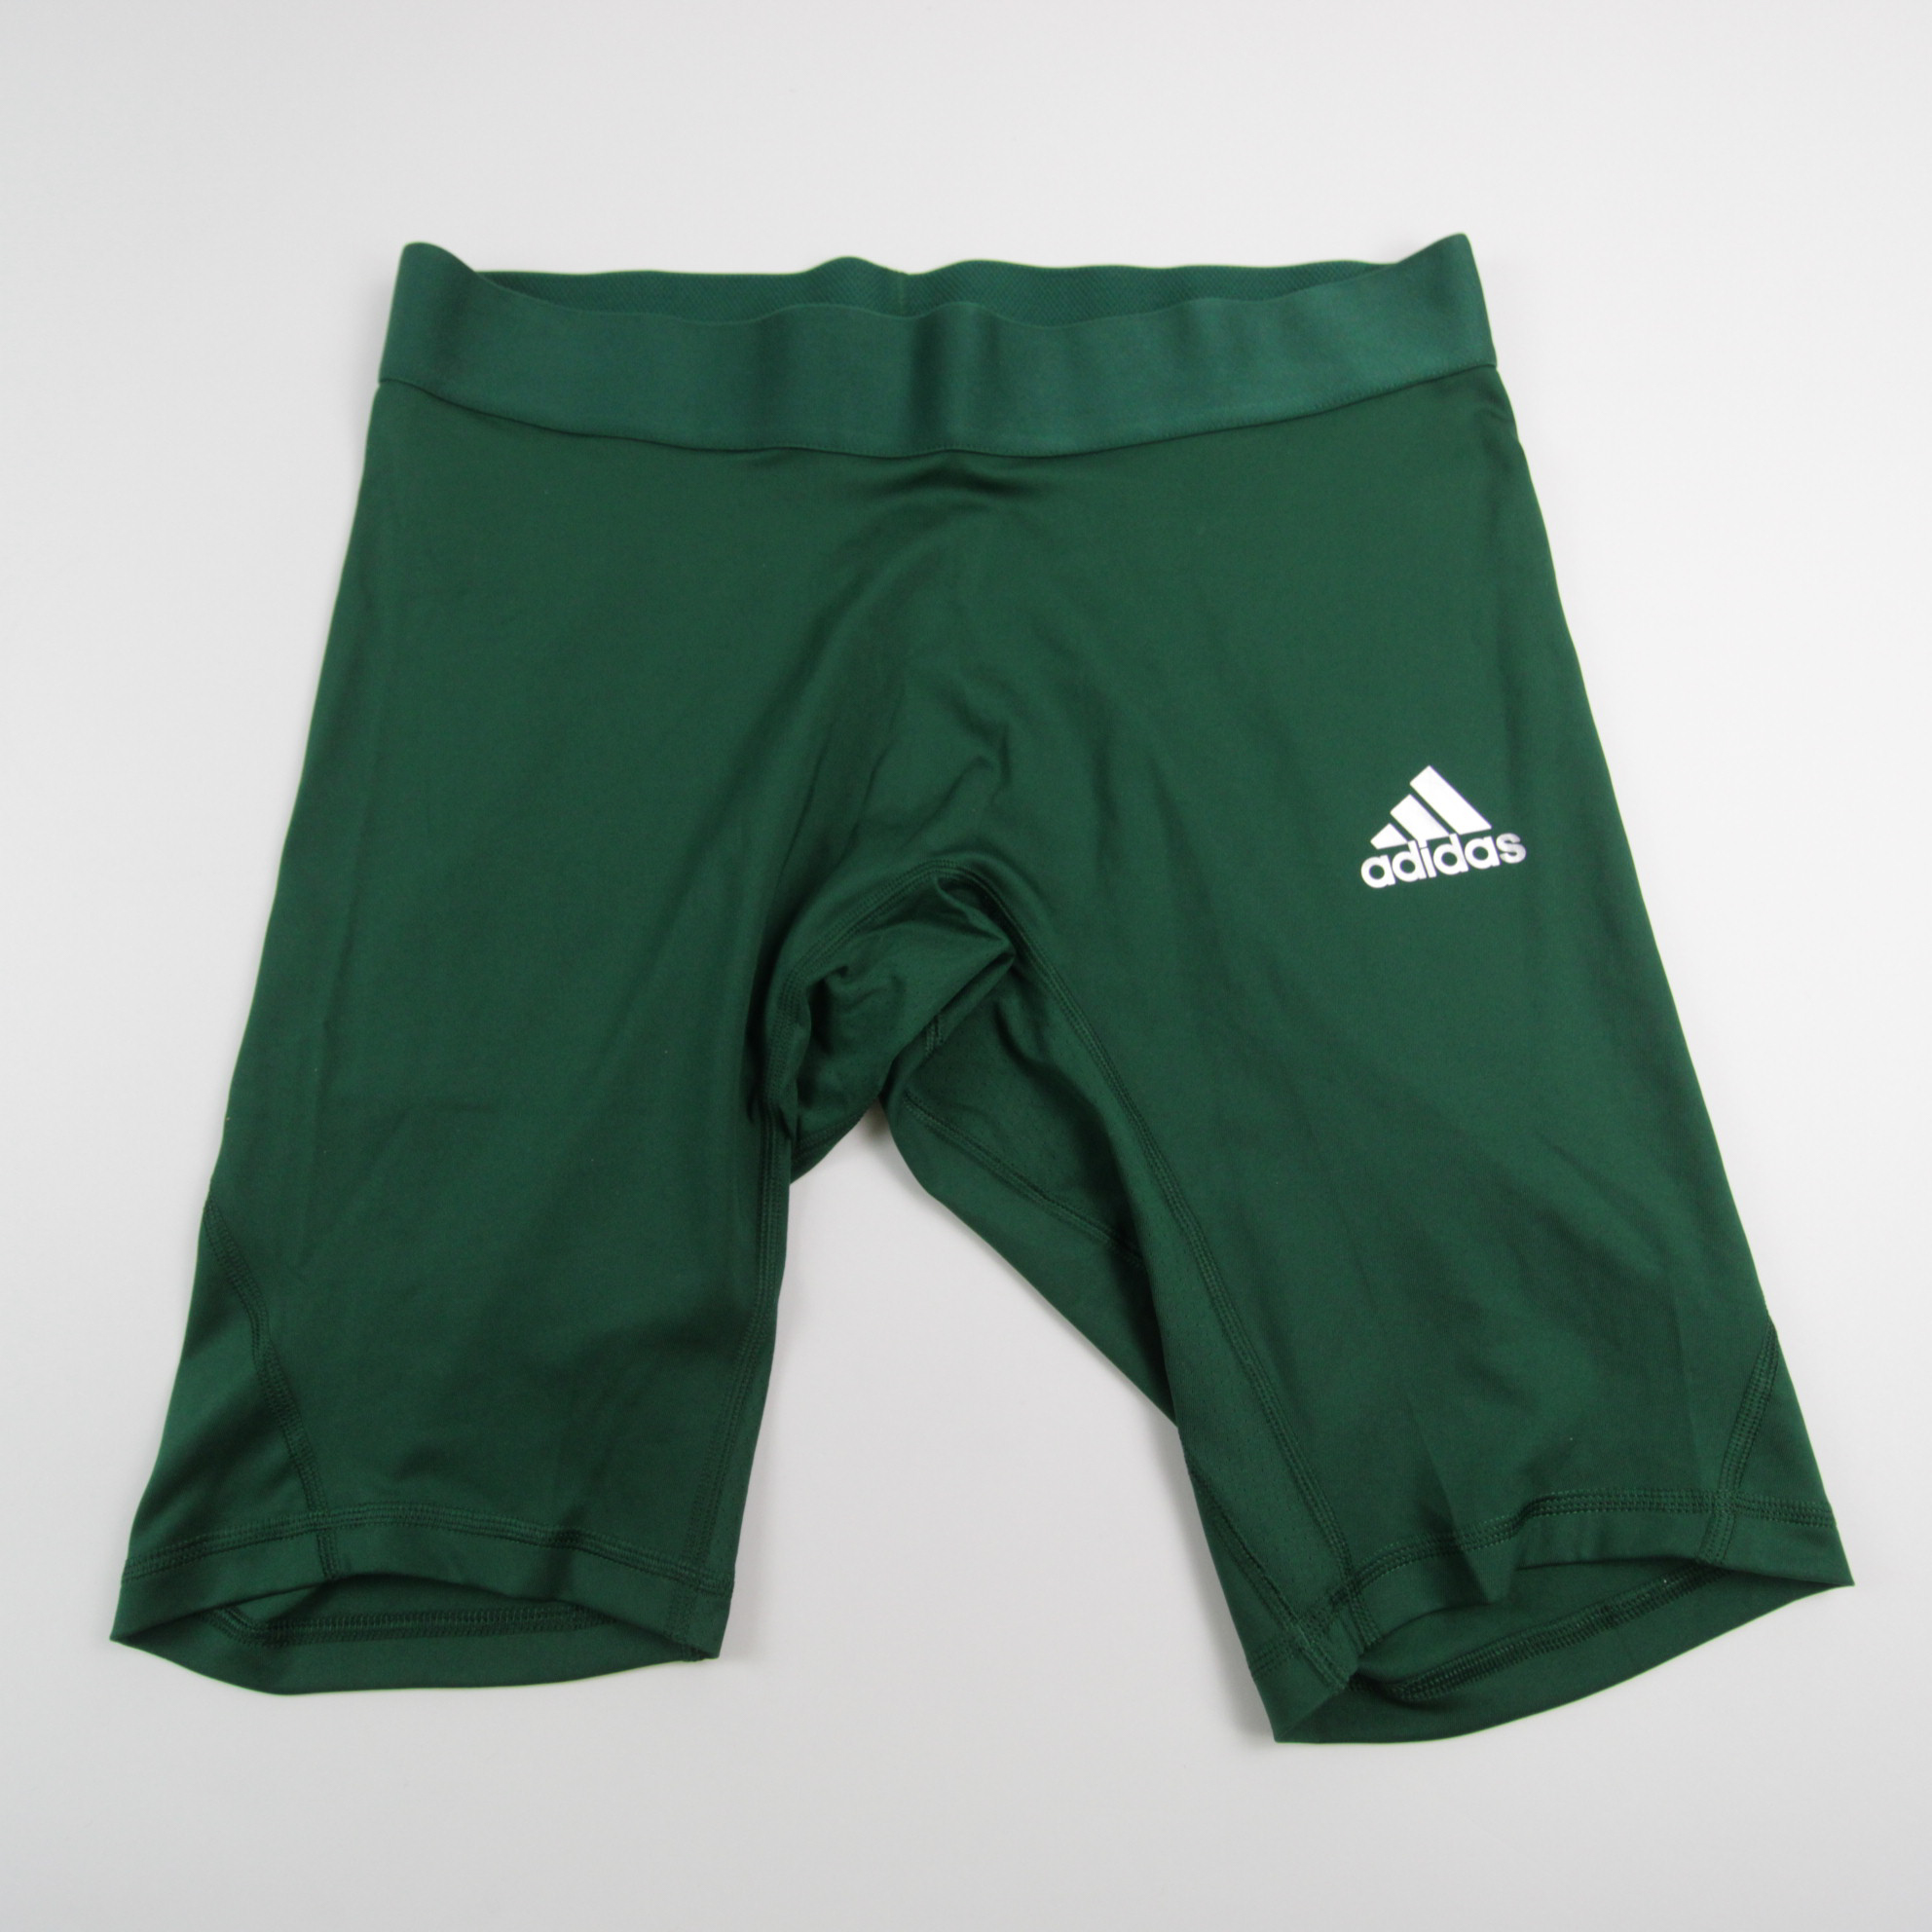 adidas Techfit Compression Shorts Men's Dark Green New without